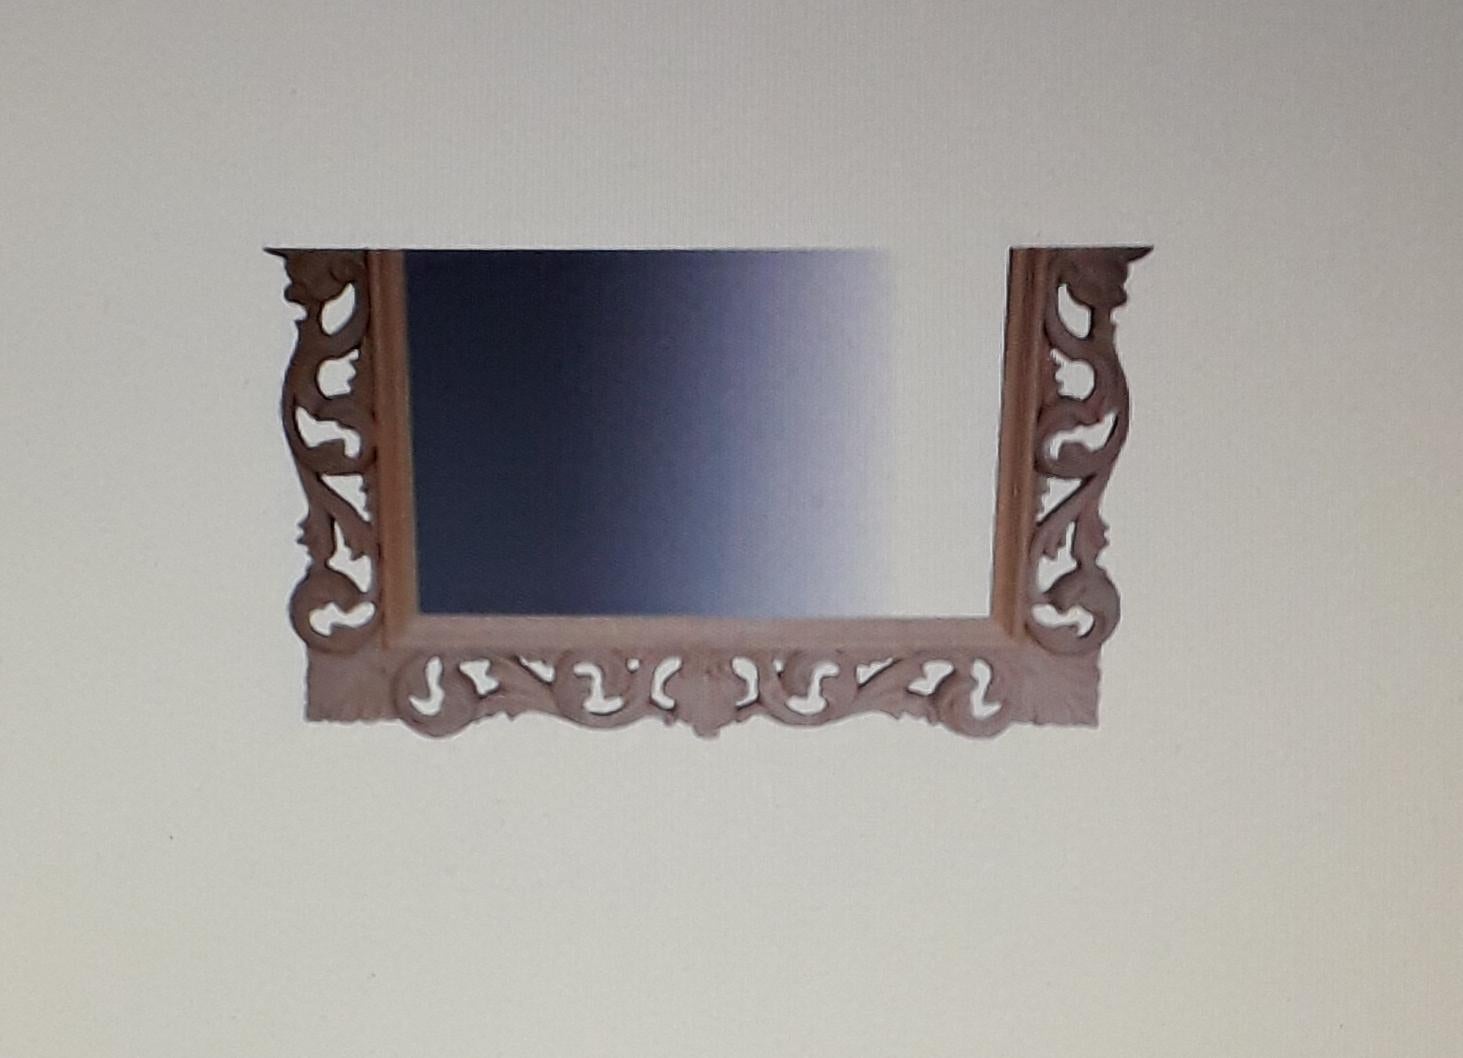 Italian carved mirror
Carved in lime wood in the traditional Florentine manor the Italians have been reviving these mirrors for centuries deriving them from gilded 17th century models.

The mirror seems smaller in the images and measures just